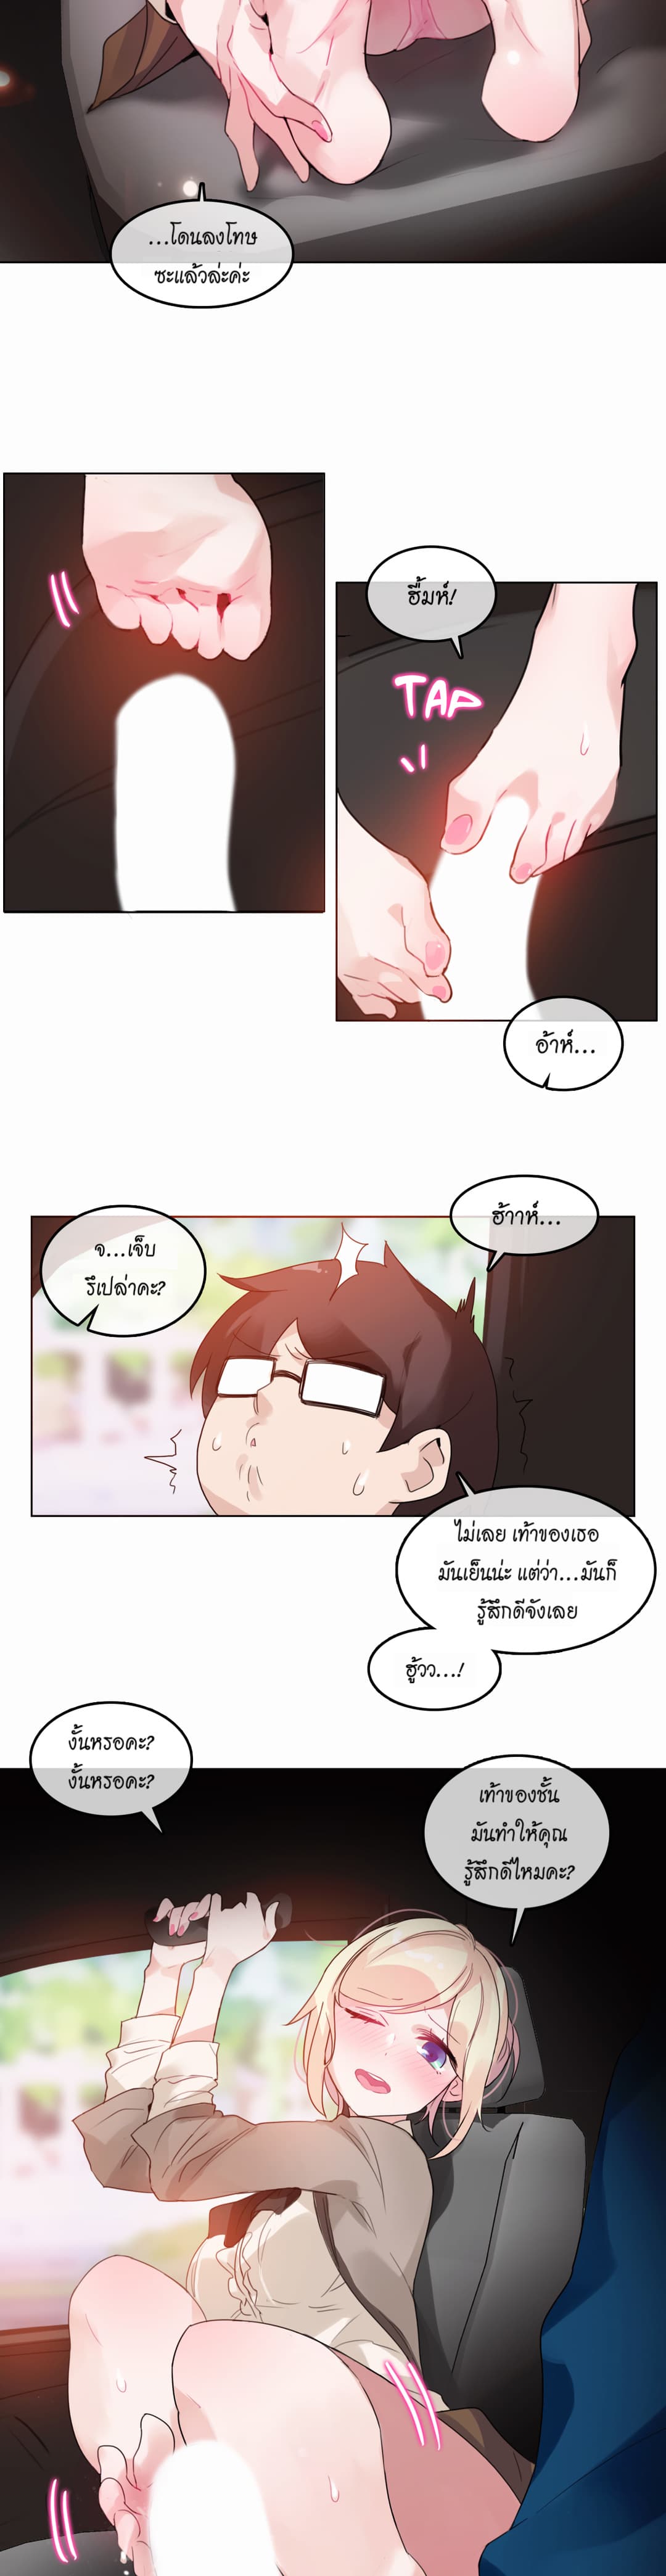 A Pervert’s Daily Life 19 (5)